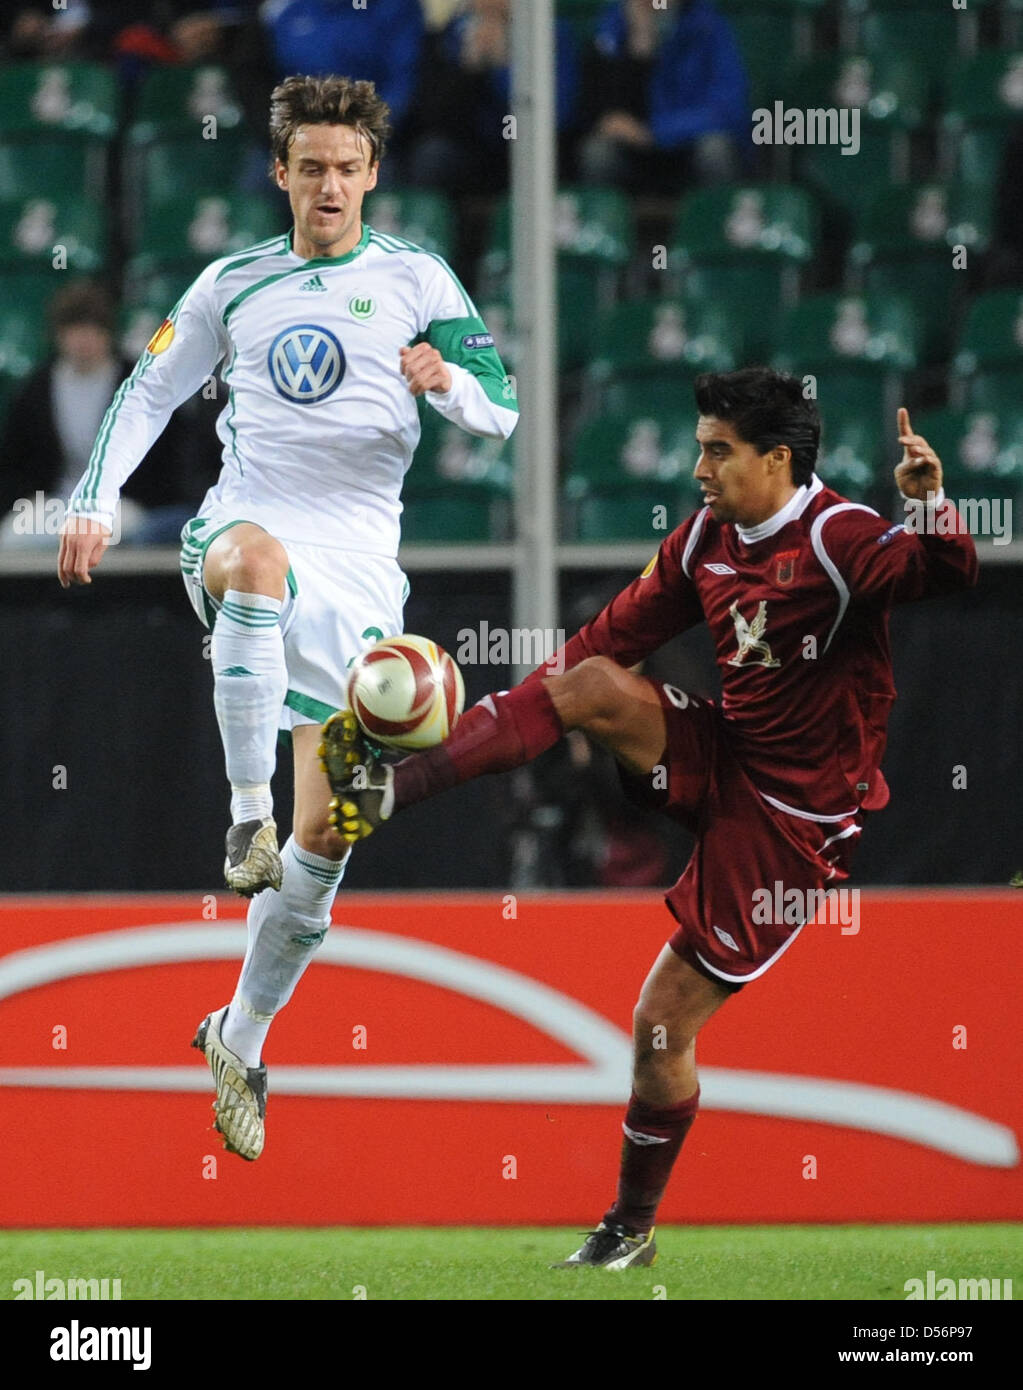 Wolfsburg's Christian Gentner (L) and Kazan's Christian Noboa vie for the ball during the soccer Euro League round of last 16 second leg match VfL Wolfsburg vs Rubin Kazan at Volkswagen-Arena in Wolfsburg, Germany, 18 March 2010. Wolfsburg beat Kasan 2-1 and proceeded to the quarter finals. Photo: Peter Steffen Stock Photo